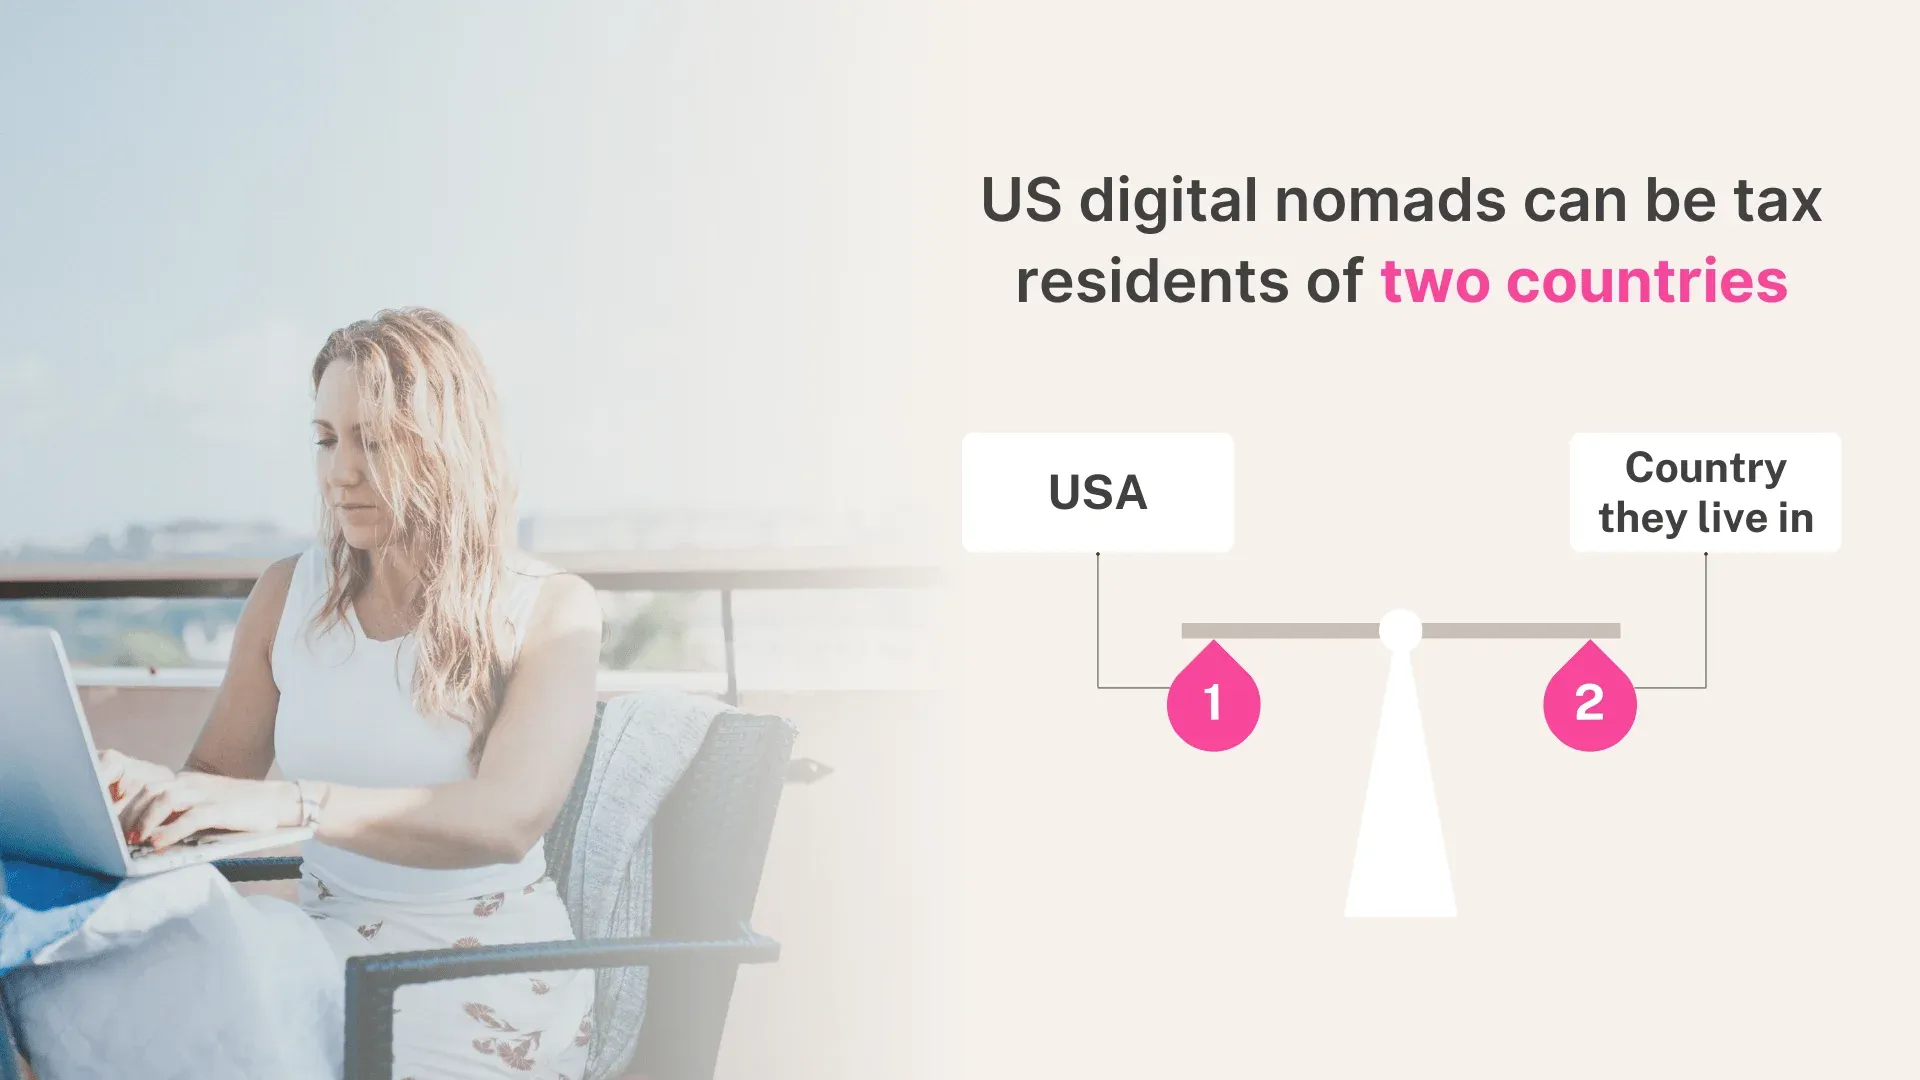 Double taxation as a US digital nomad